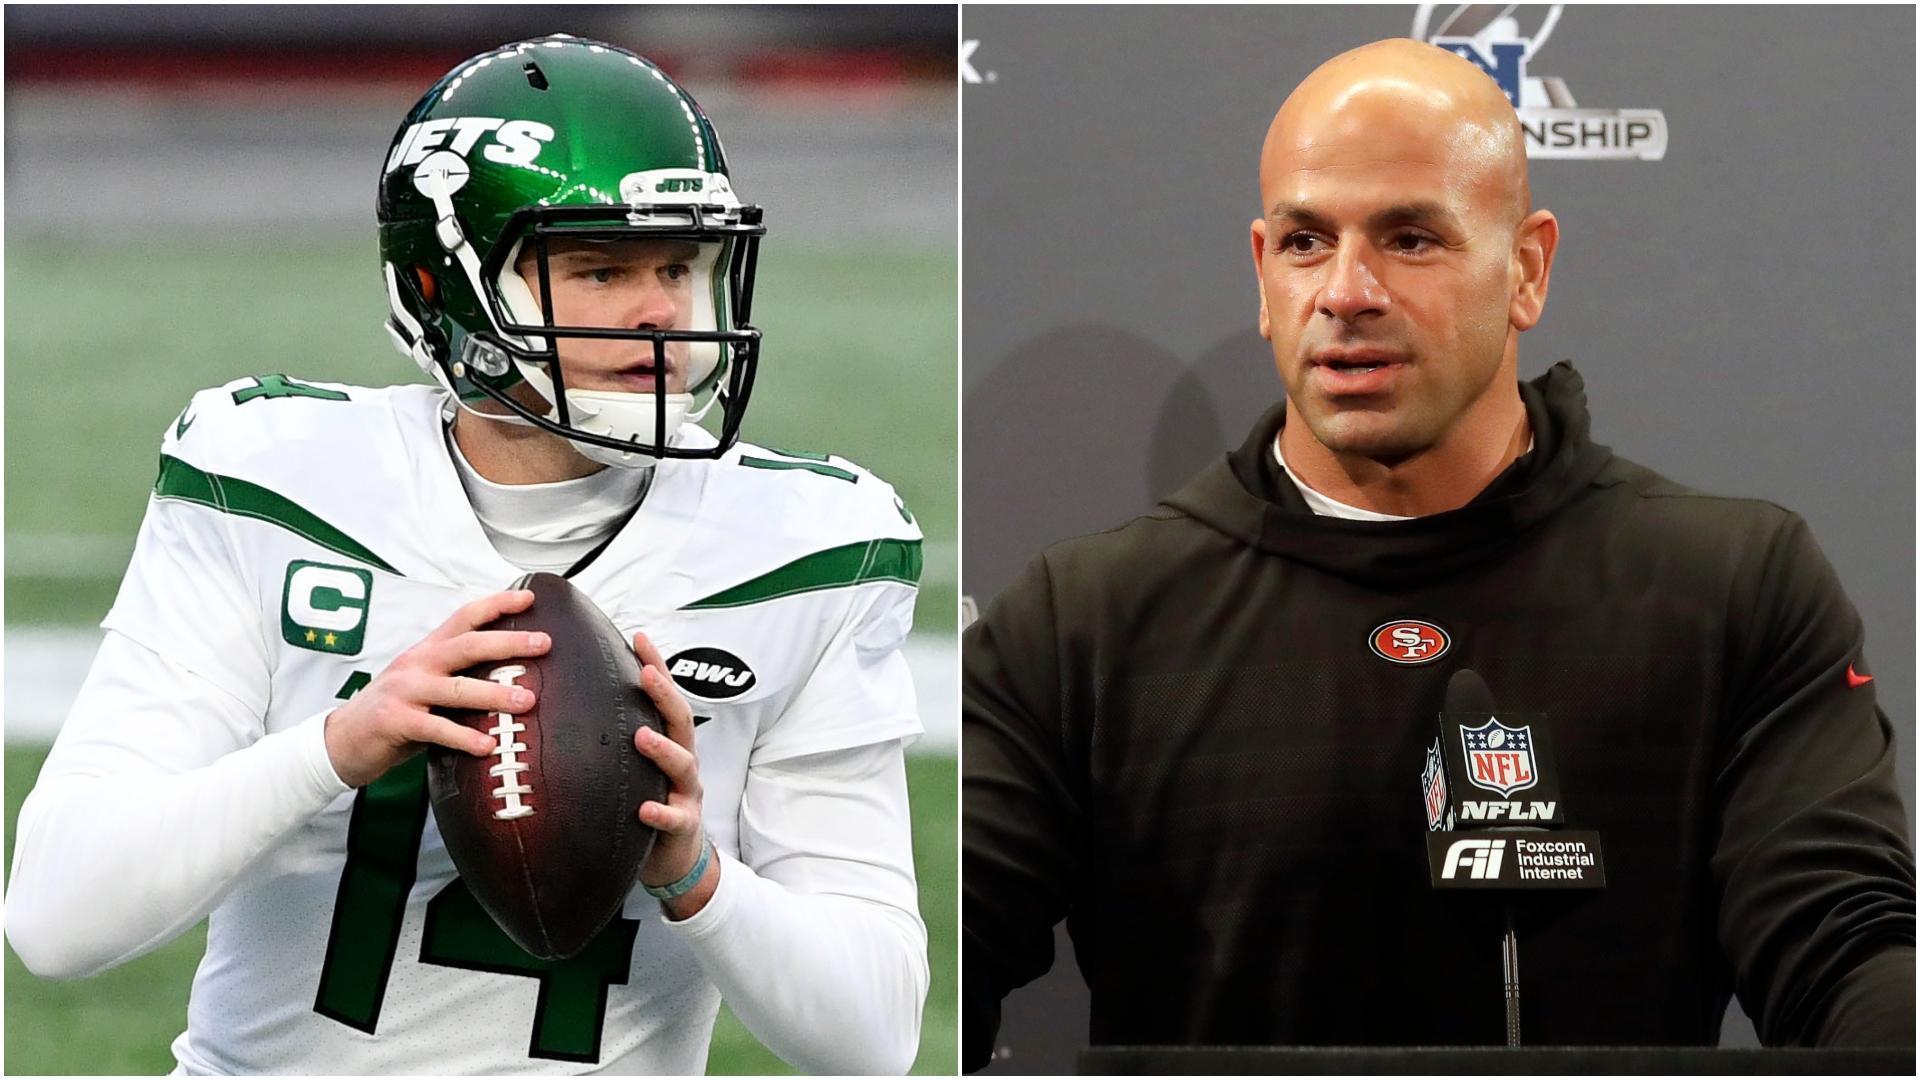 What does Robert Saleh's arrival mean for Sam Darnold?